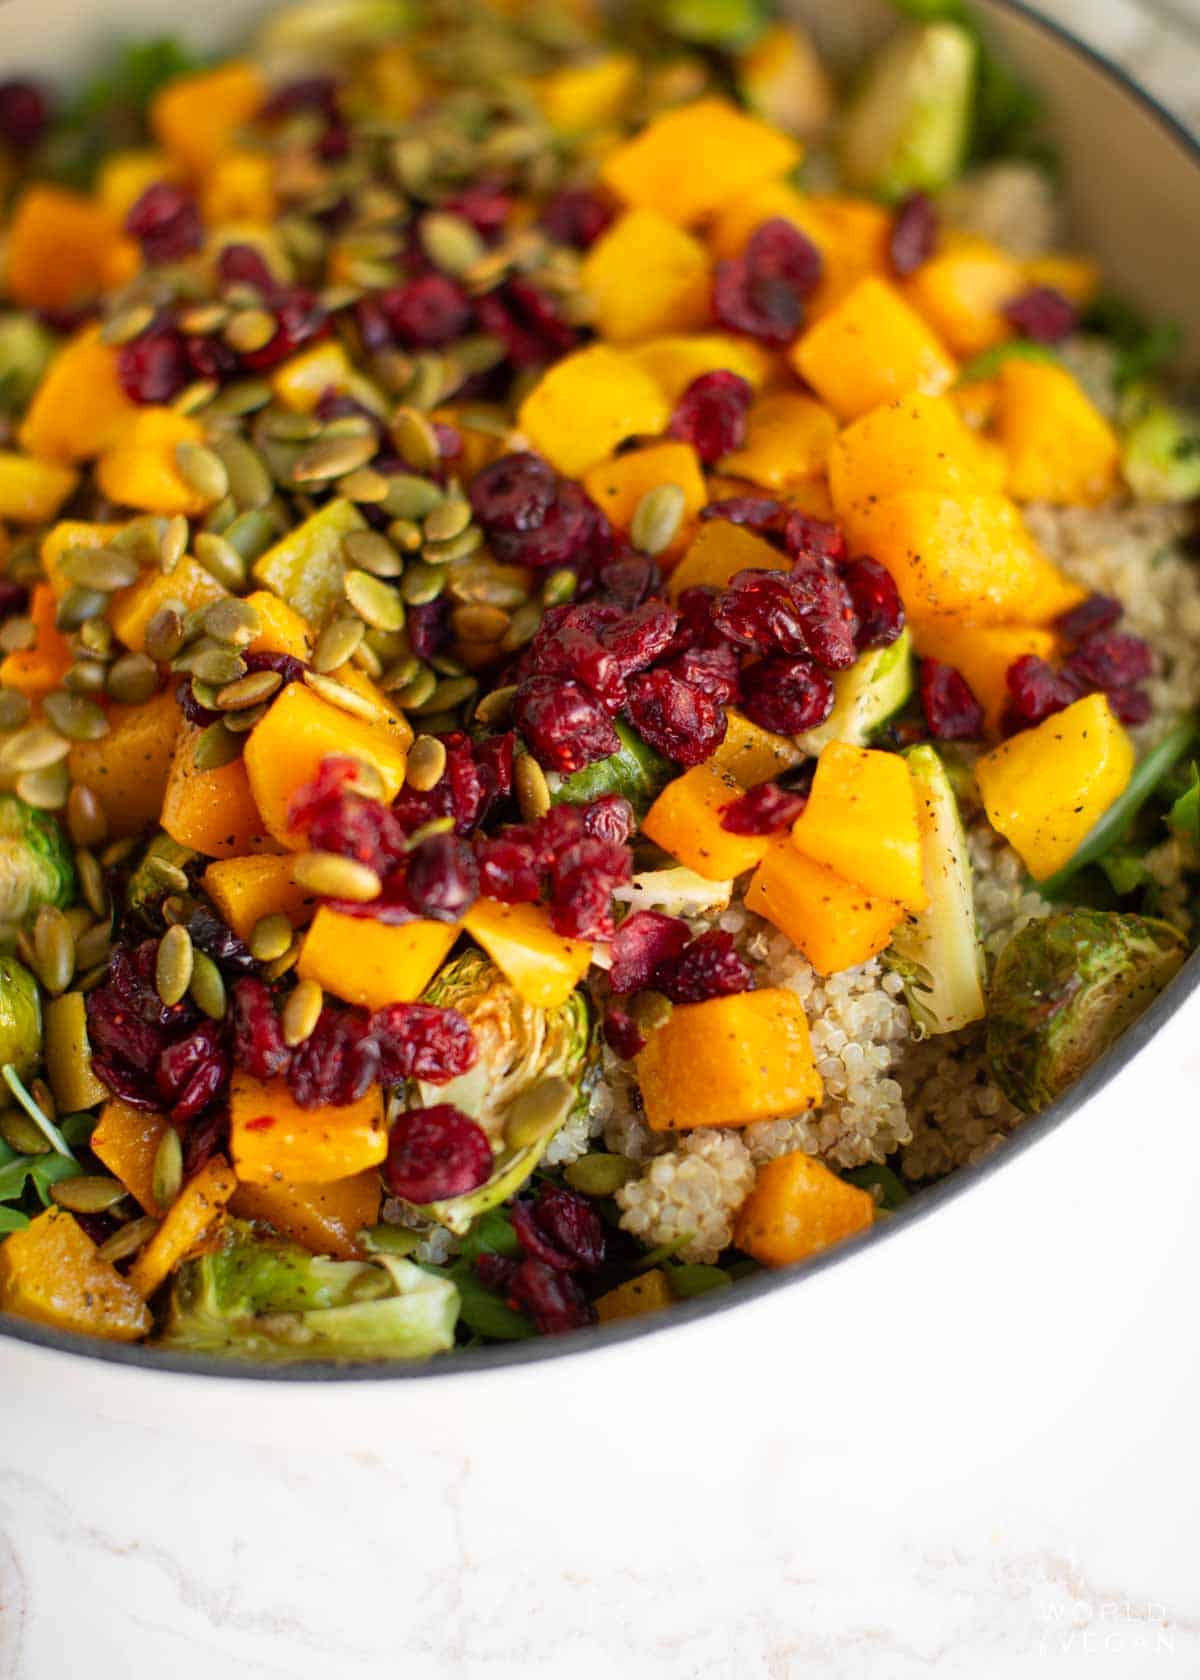 Arugula quinoa salad in a bowl topped with roasted butternut squash, dried cranberries and pumpkin seeds.